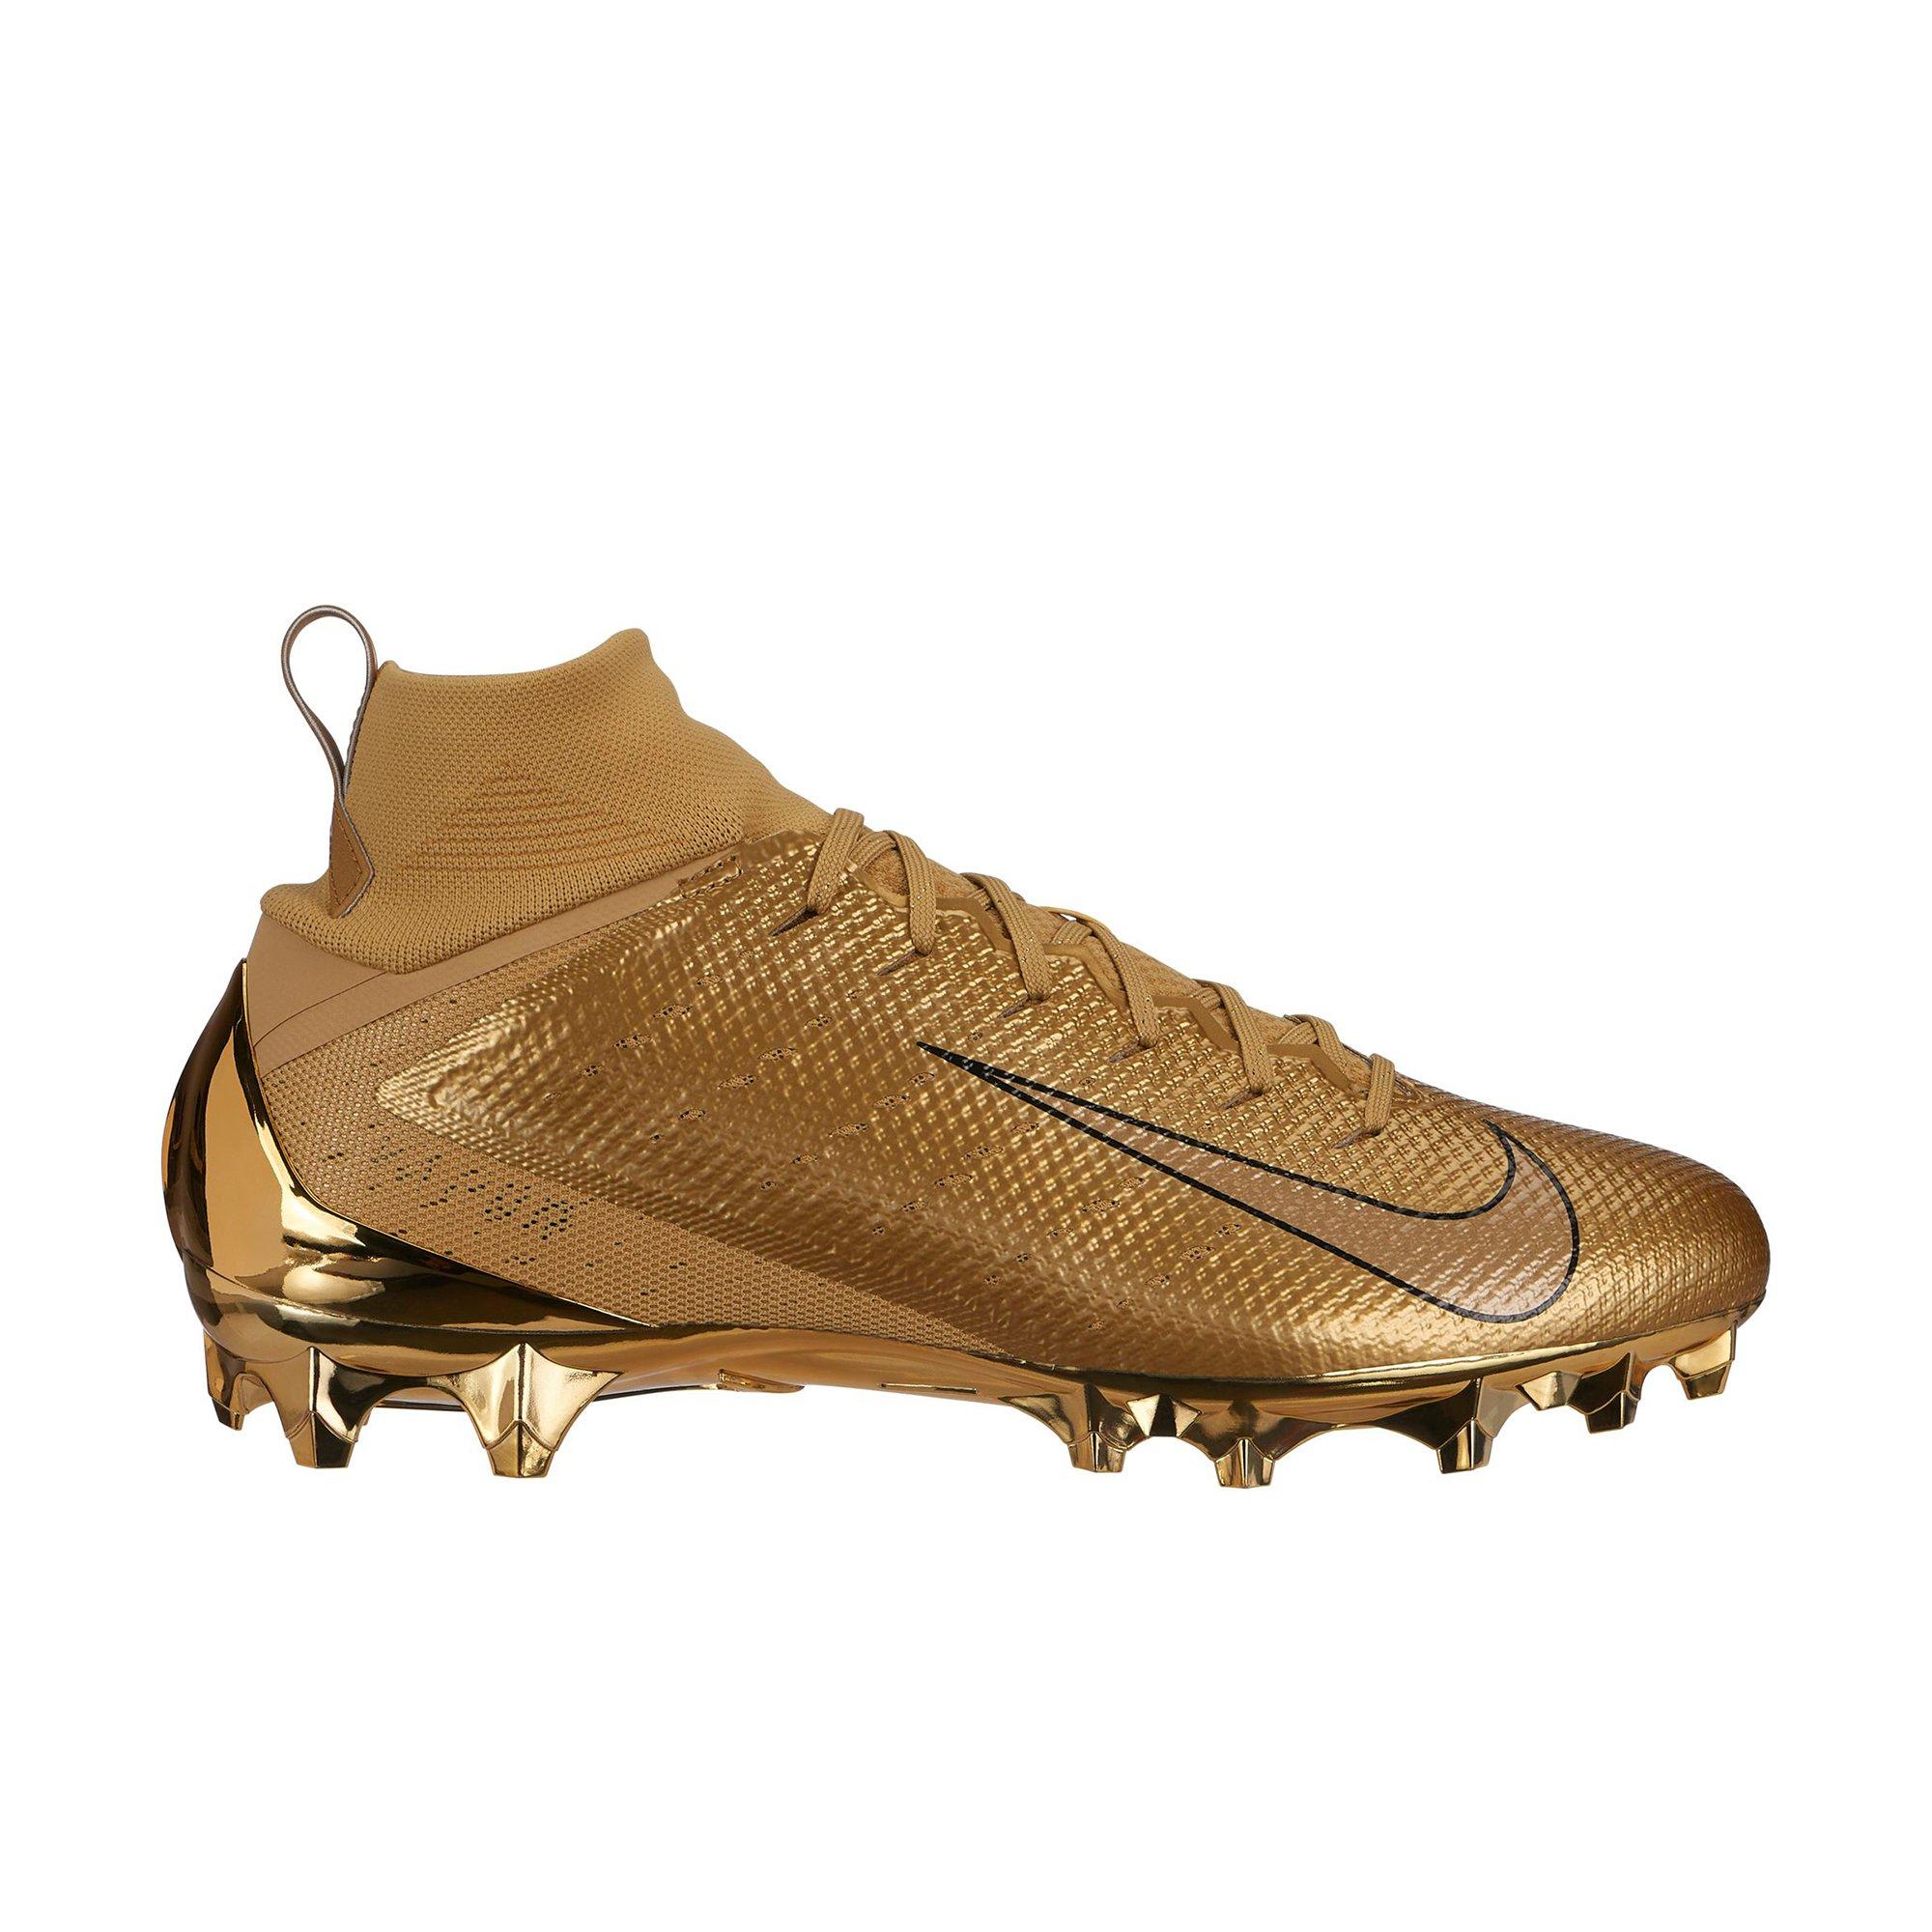 nike football cleats gold and white